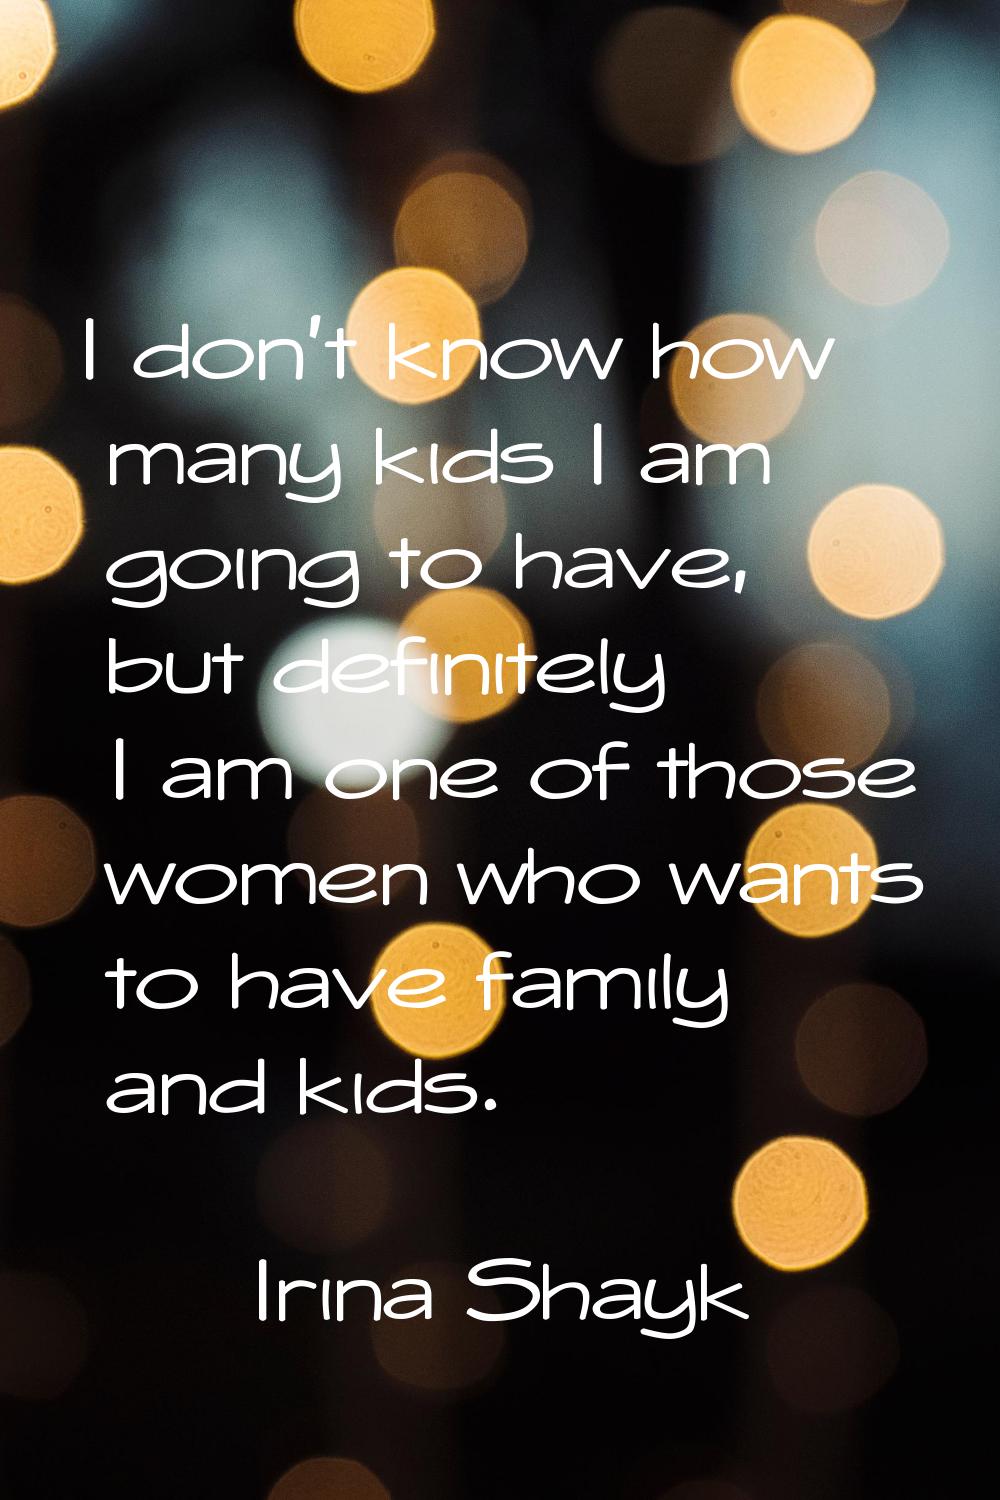 I don't know how many kids I am going to have, but definitely I am one of those women who wants to 